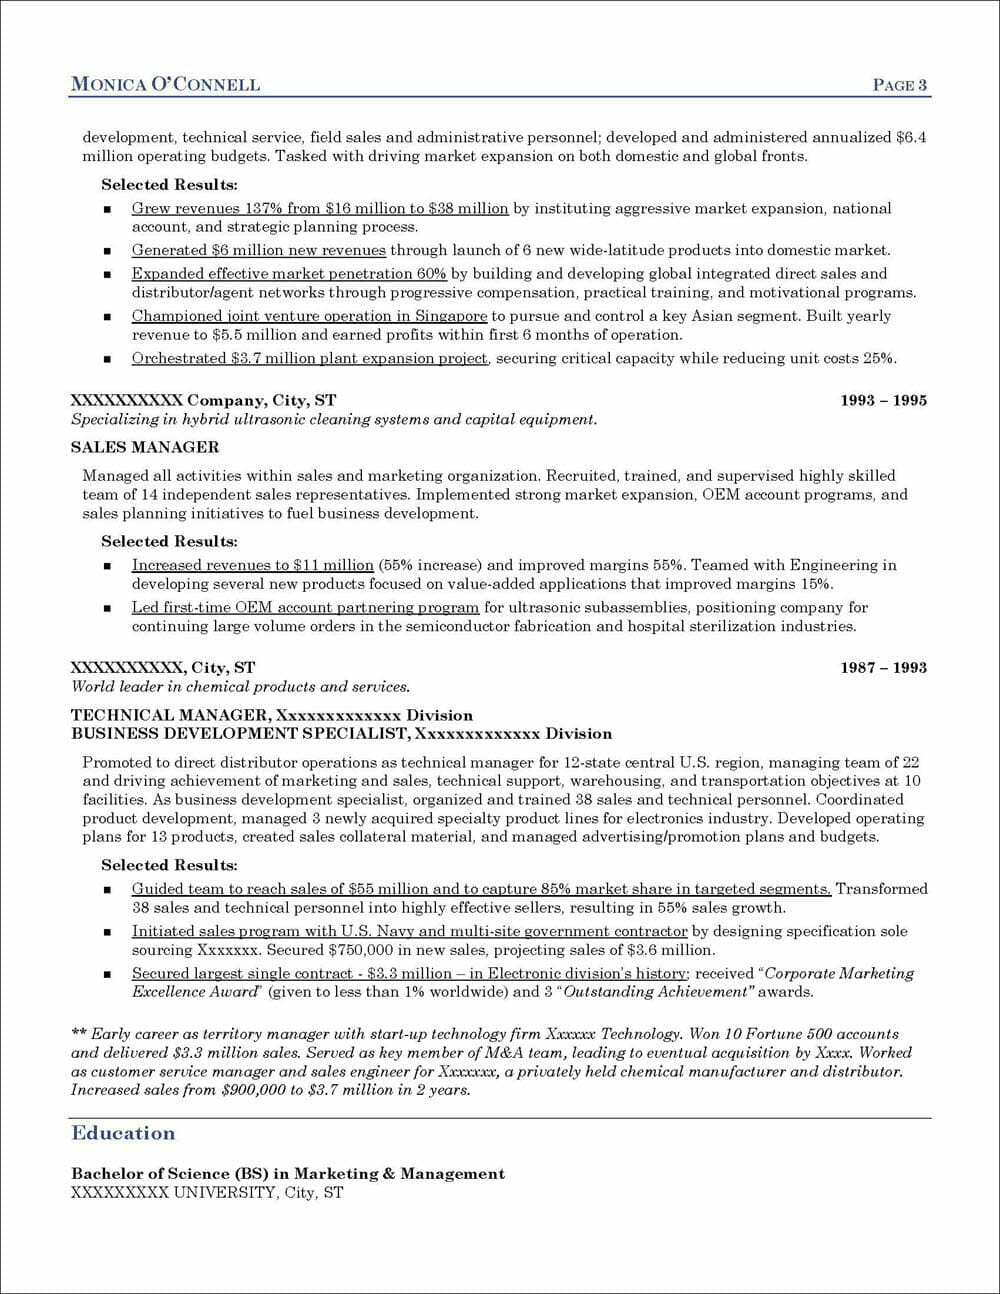 Example Corporate President Resume page 3